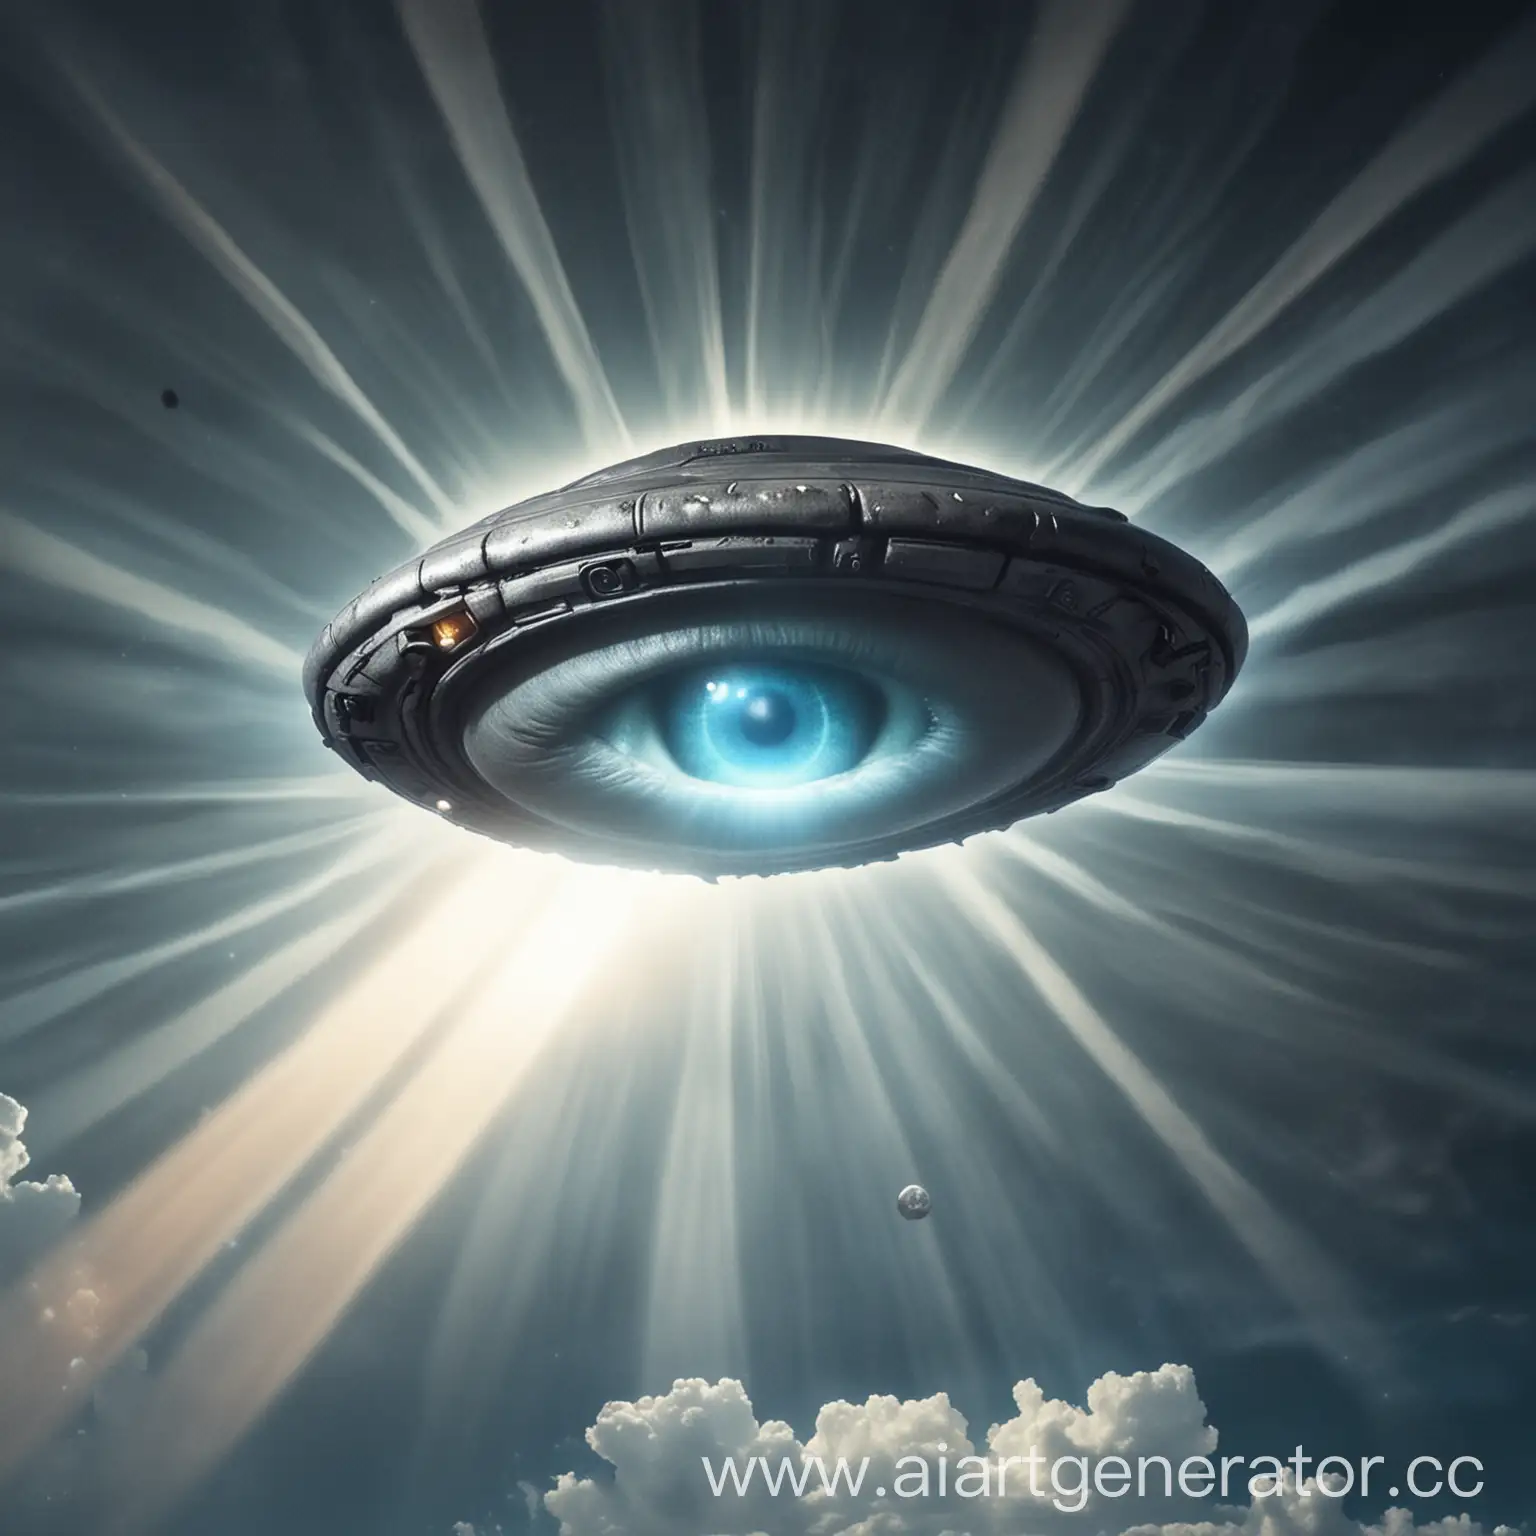 UFO sucks in a large flying eye with a beam who is located underneath 